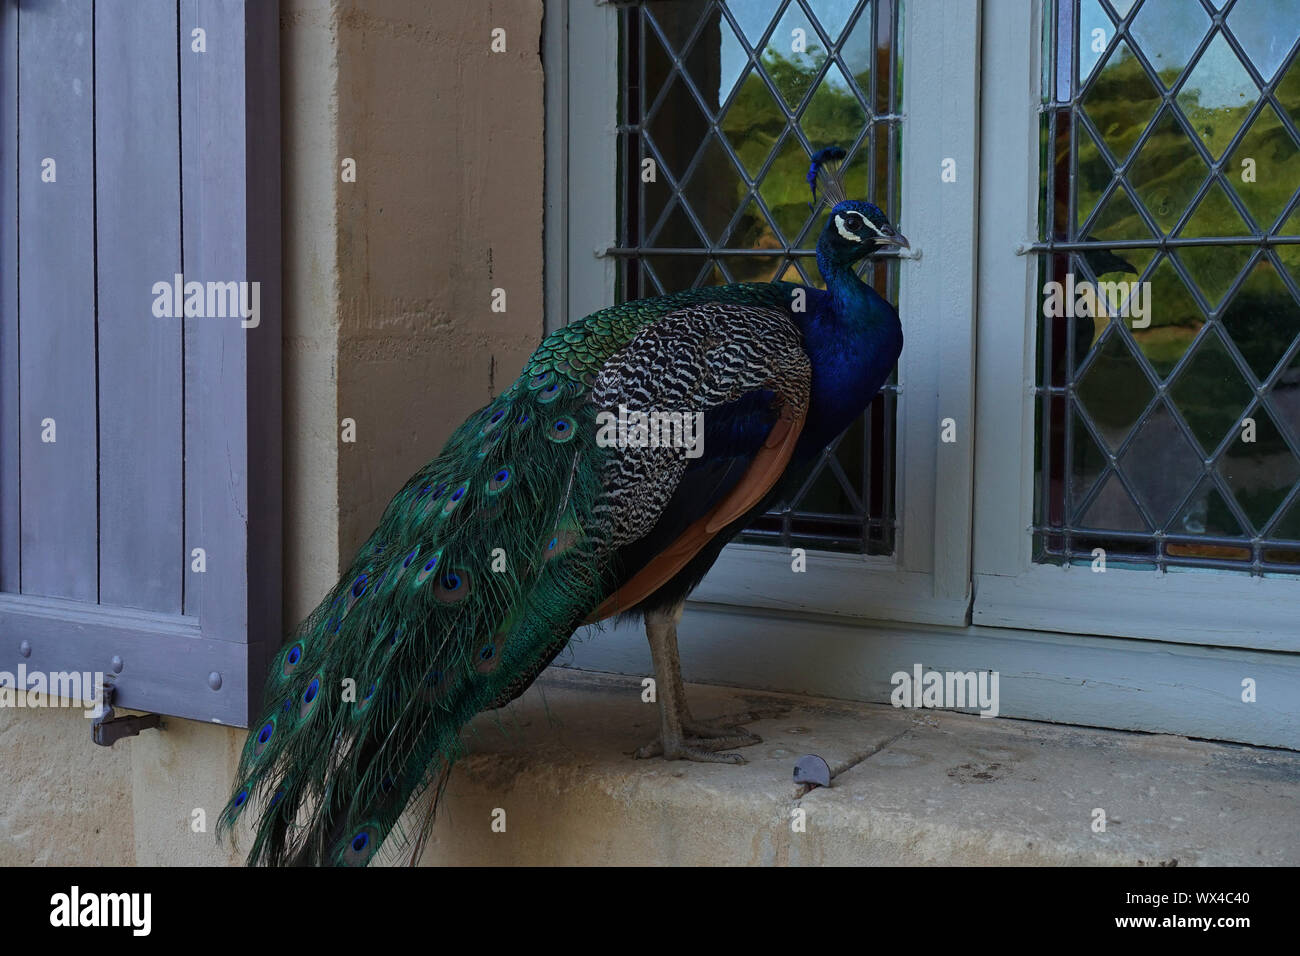 A Peacock stood on the windowsill of an old French building. Stock Photo